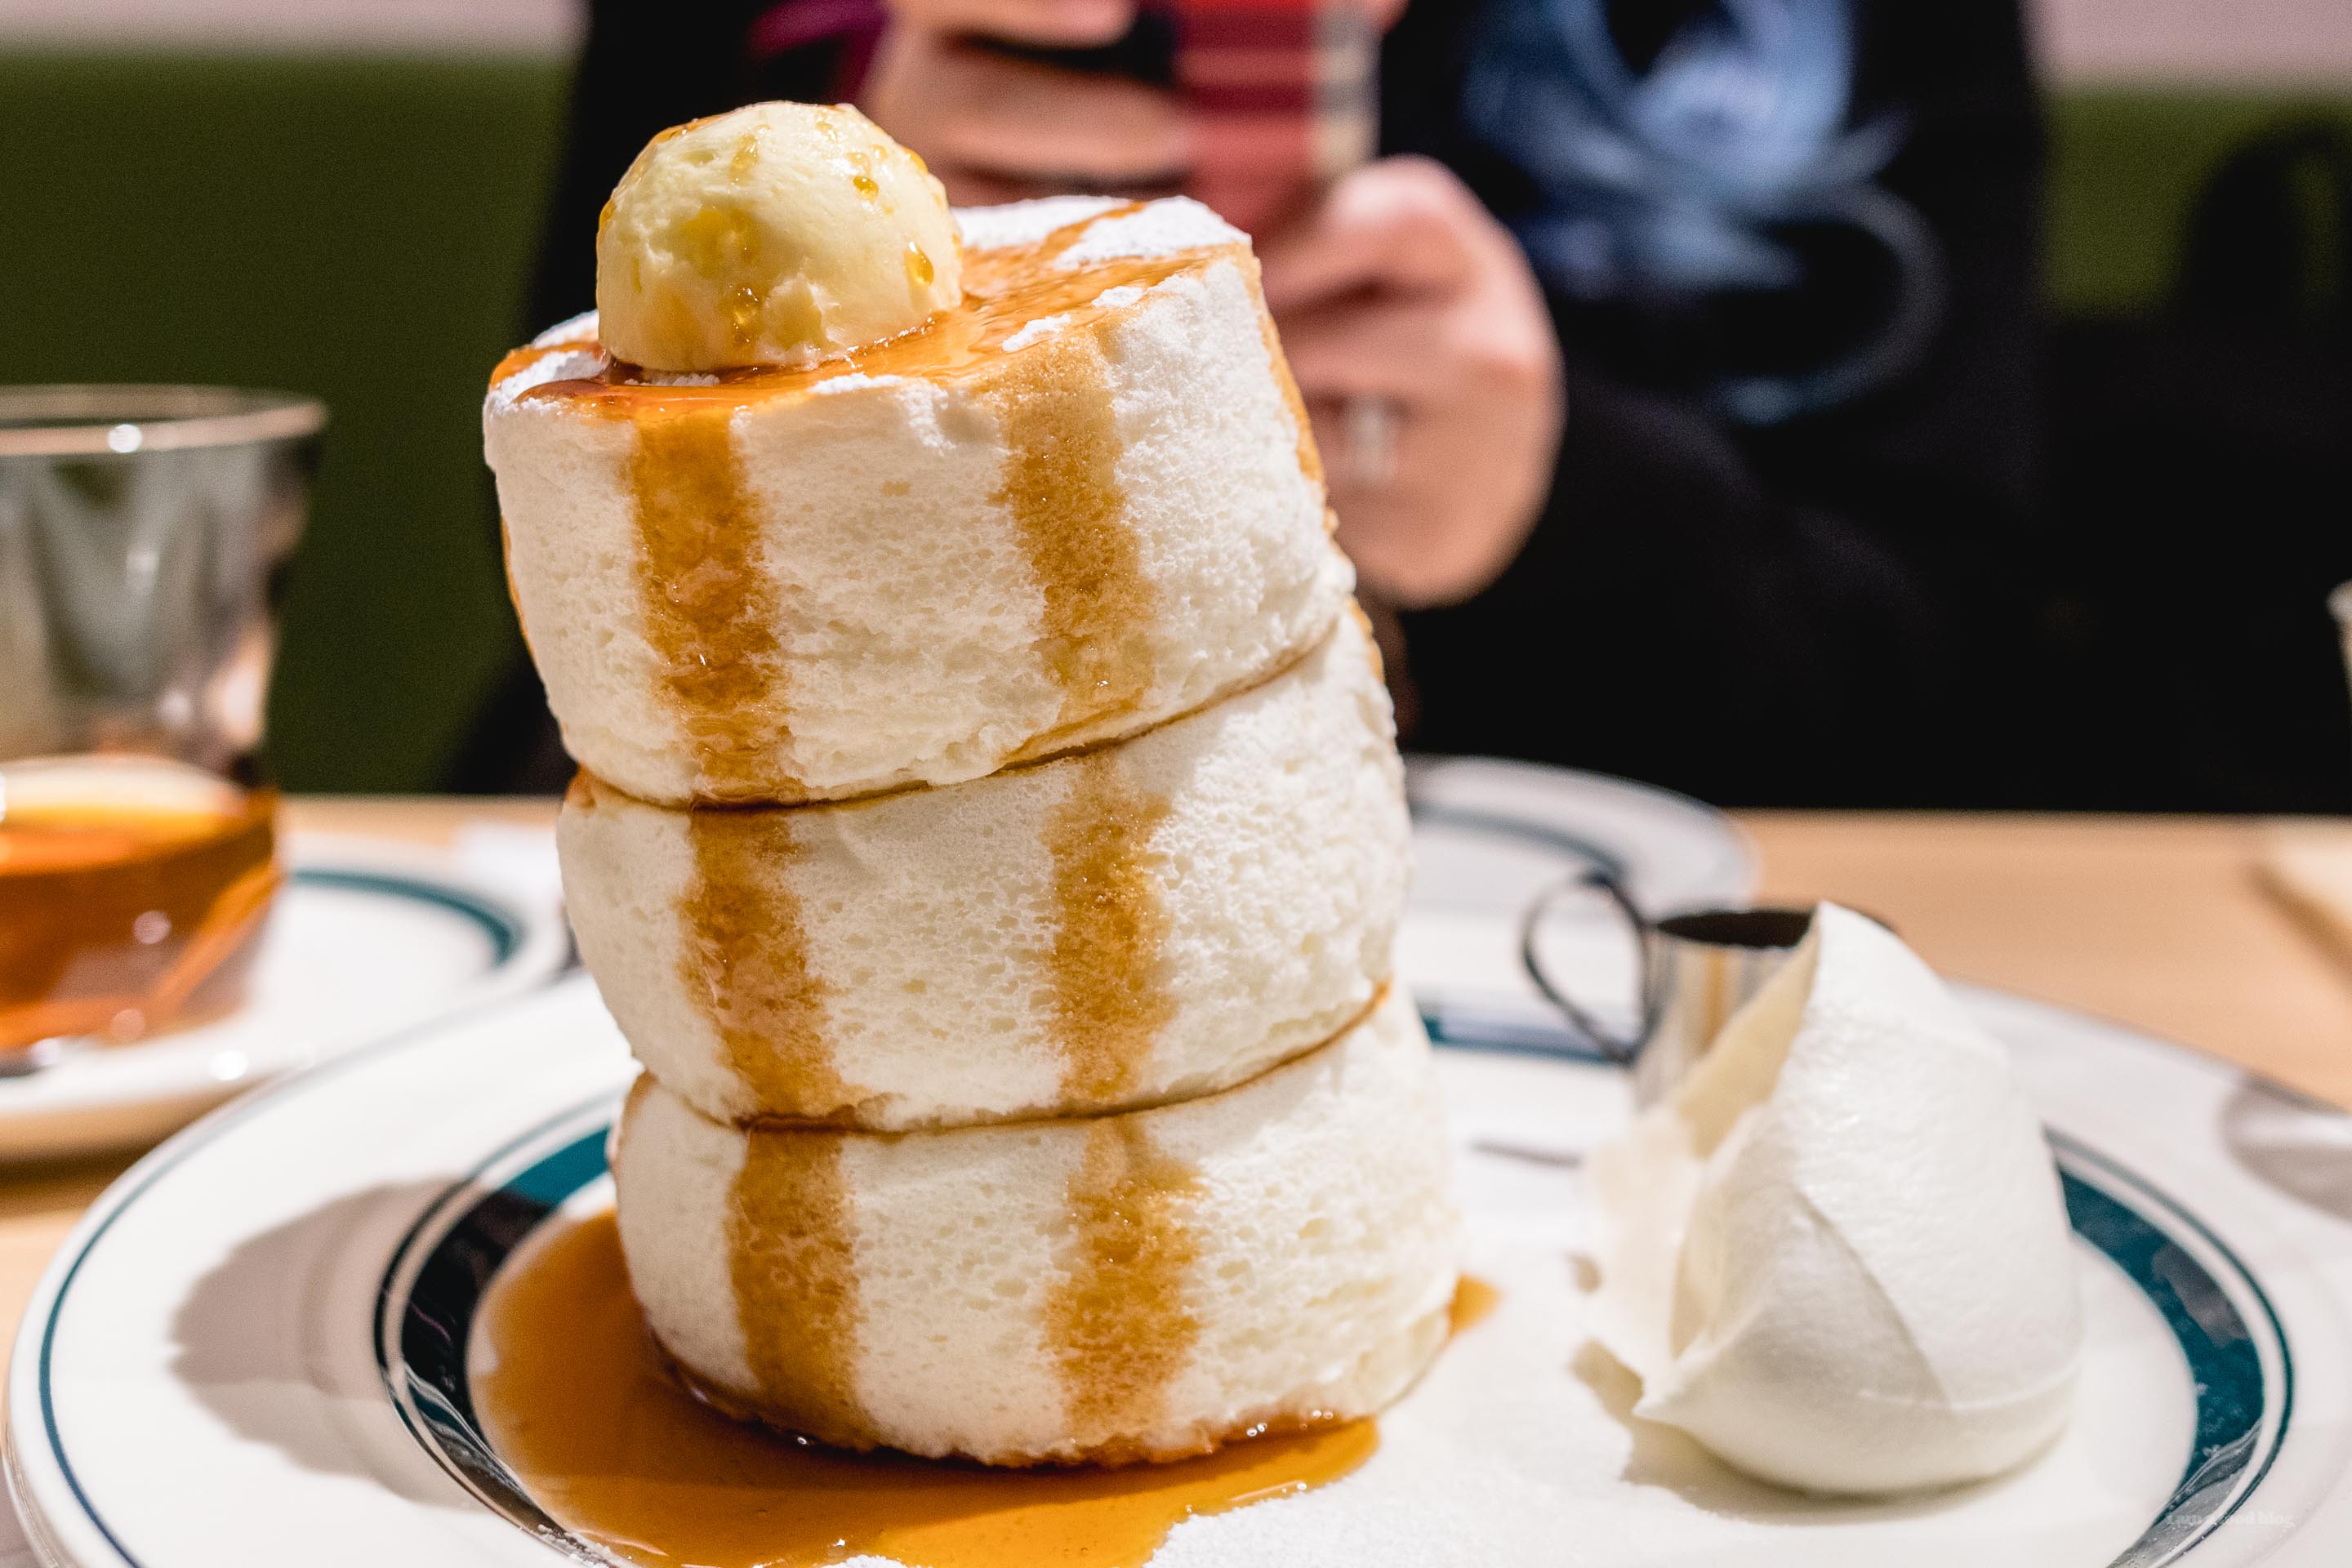 Tokyo Food Guide: Where to Eat Fluffy Japanese Pancakes in Tokyo